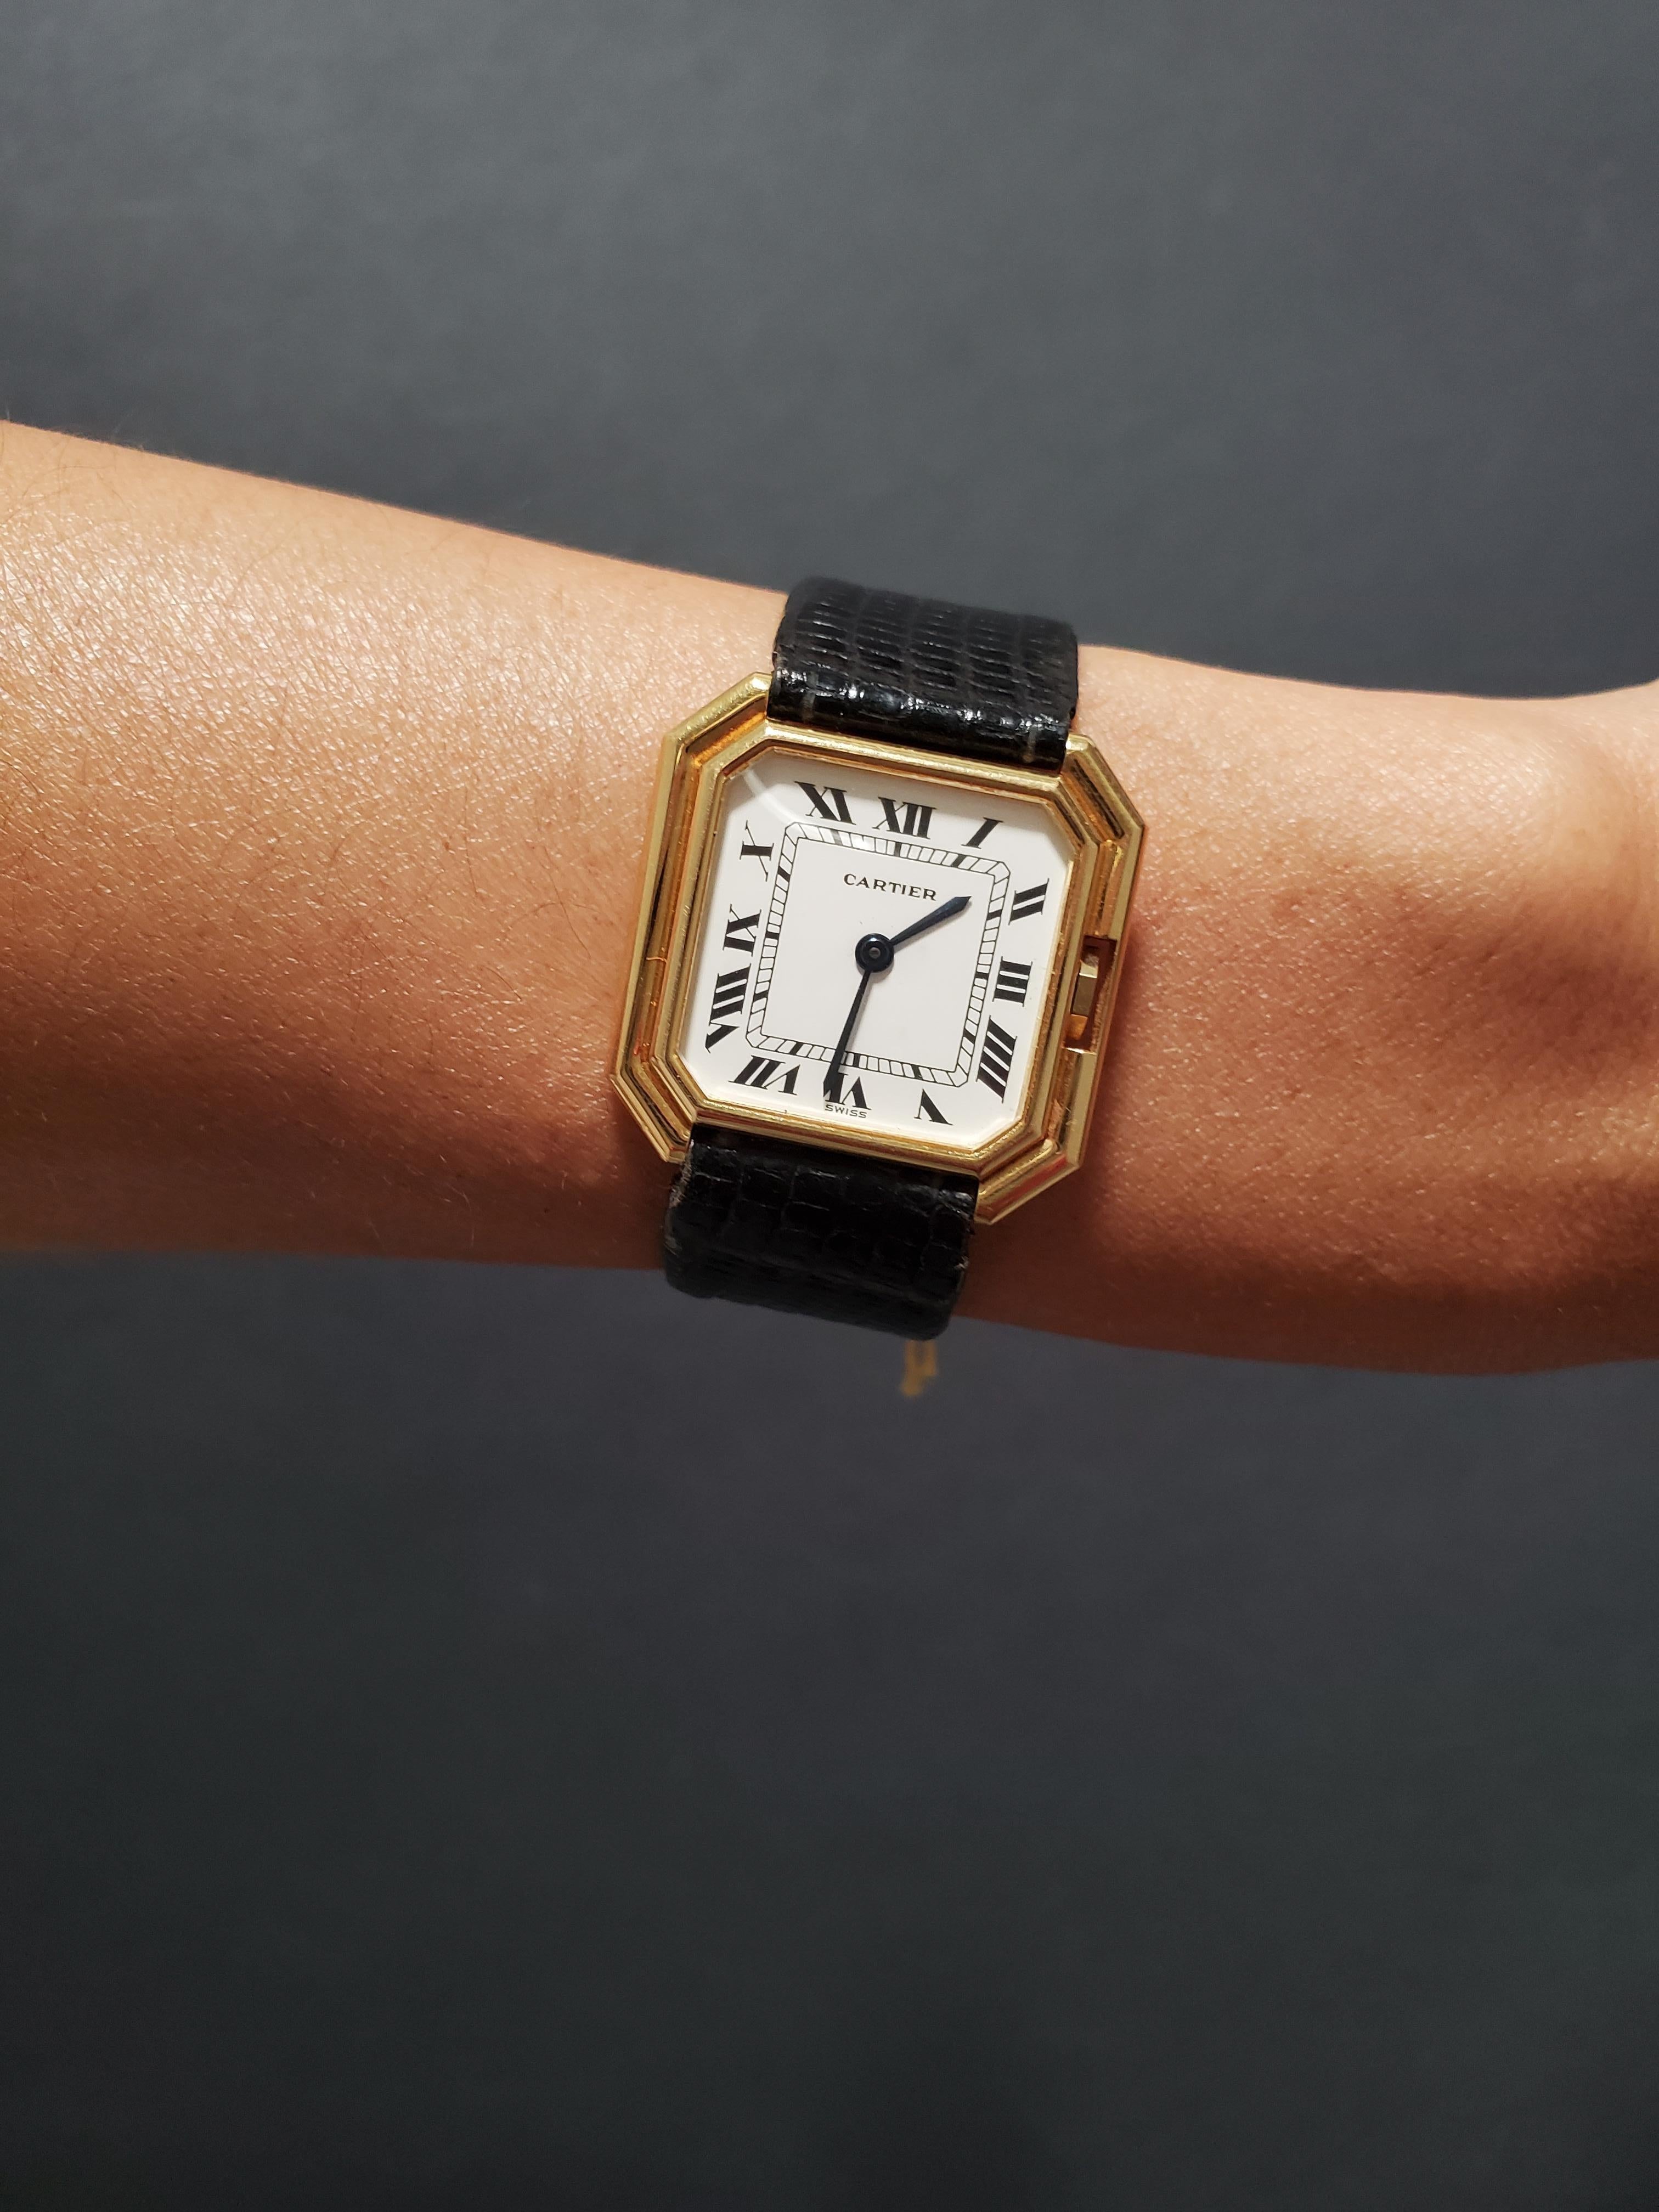 Introduction:
This Vintage Cartier Paris Centure Octagon Shape watch is the Small size, circa 1975-1980.  The watch is made in 18K yellow gold 2-body case, and measures 25 x 25 mm.  The watch is fitted with a mechanical manual wind 17-jewel